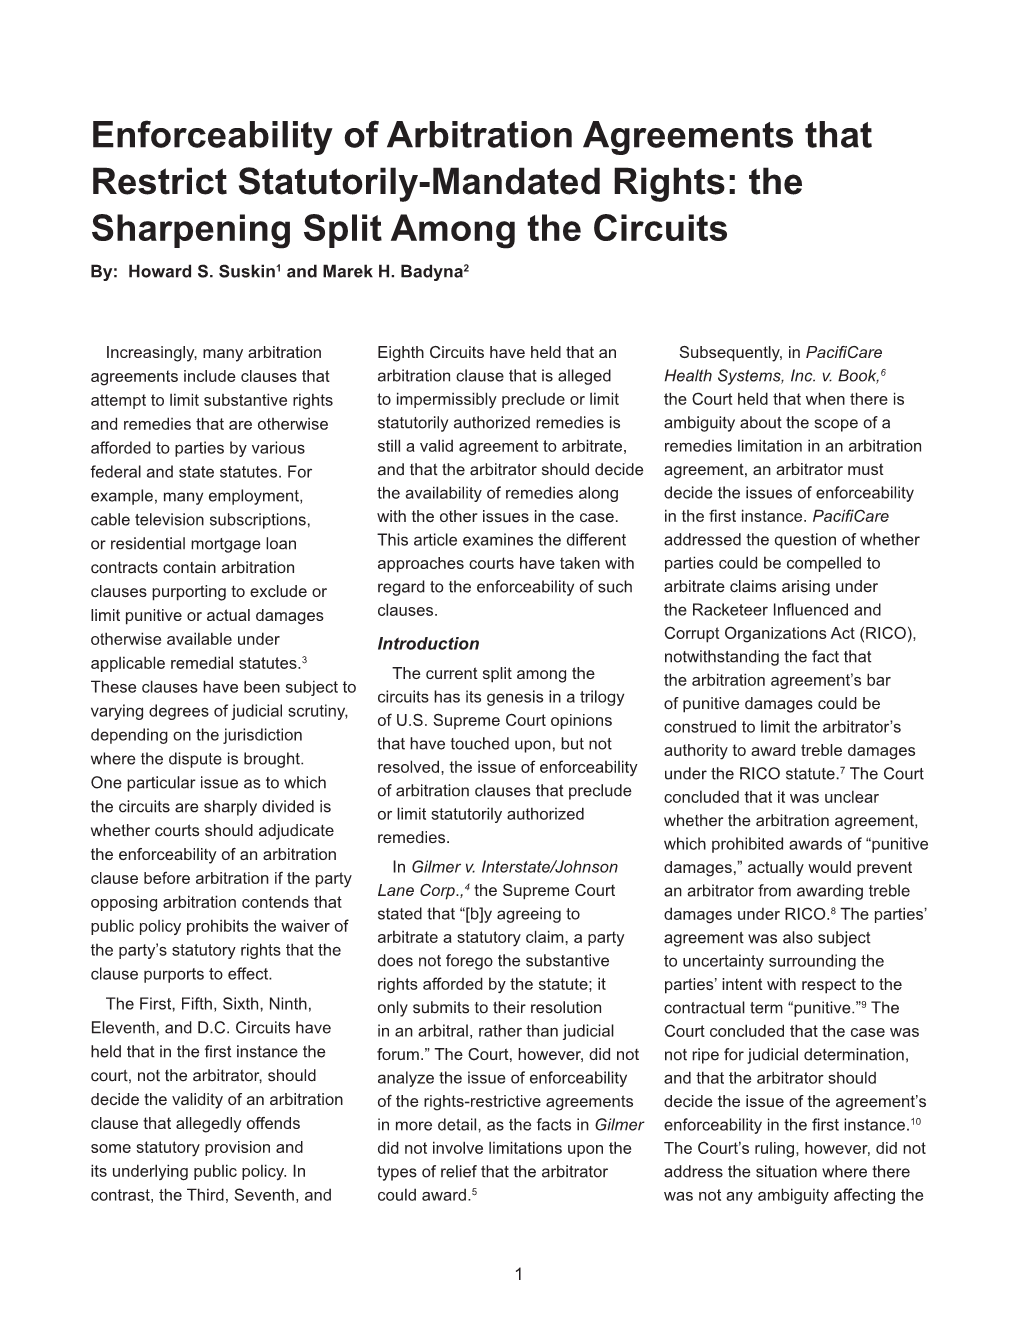 Enforceability of Arbitration Agreements That Restrict Statutorily-Mandated Rights: the Sharpening Split Among the Circuits By: Howard S